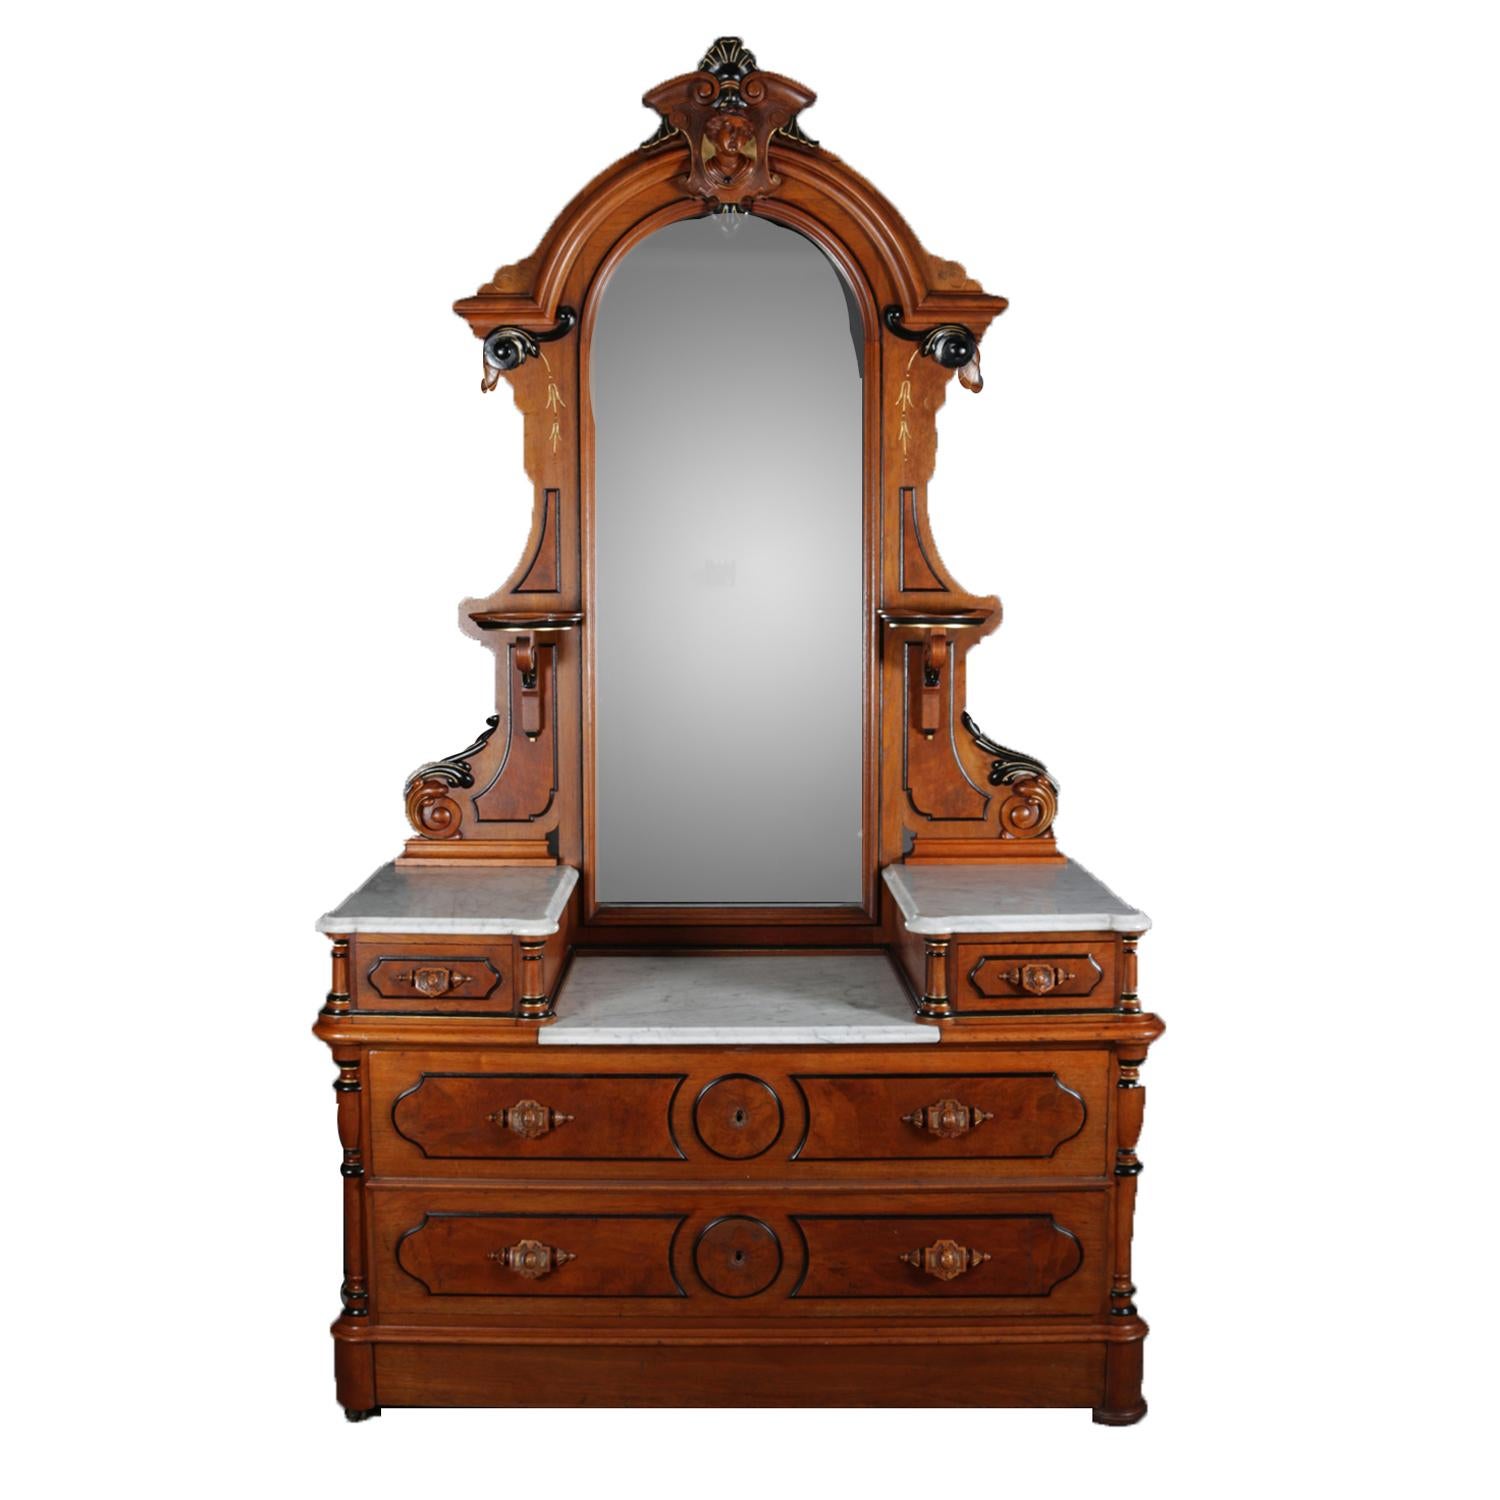 An antique Renaissance Revival dresser features drop centre form with dressing mirror having ebonized and gilt carved walnut and burl frame with crest having female mask and lower candle sconces, marble top case having flanking glove boxes over two